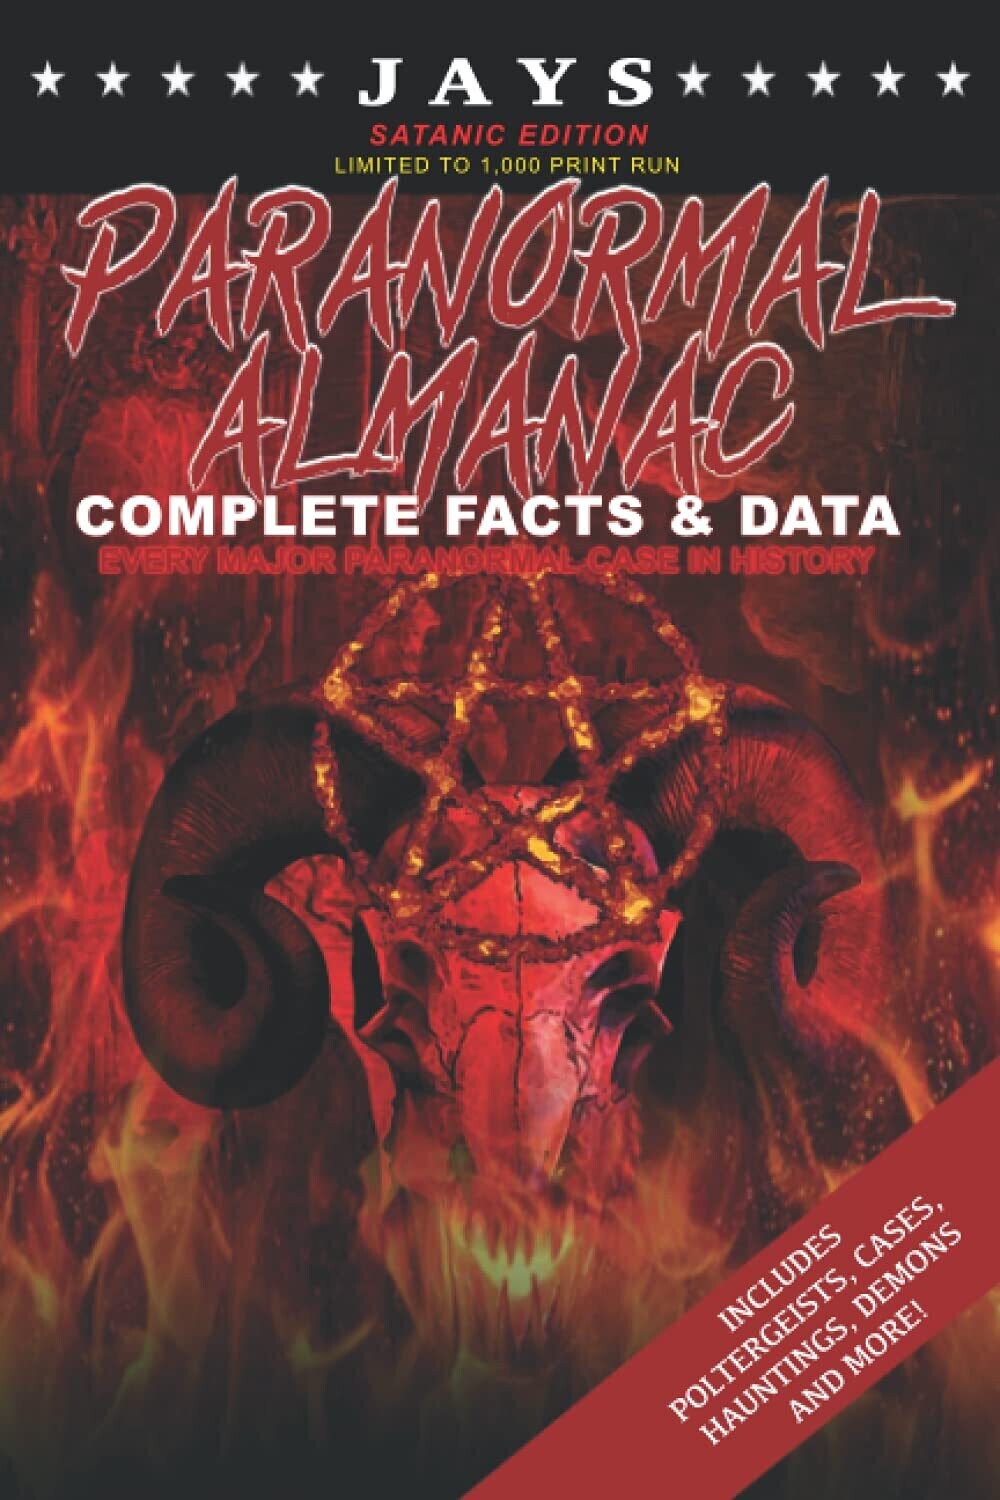 Jays Paranormal Almanac: Complete Facts & Data Jays Paranormal Almanac: Complete Facts & Data [#3 SATANIC EDITION - LIMITED TO 1,000 PRINT RUN WORLDWIDE] [Paperback]